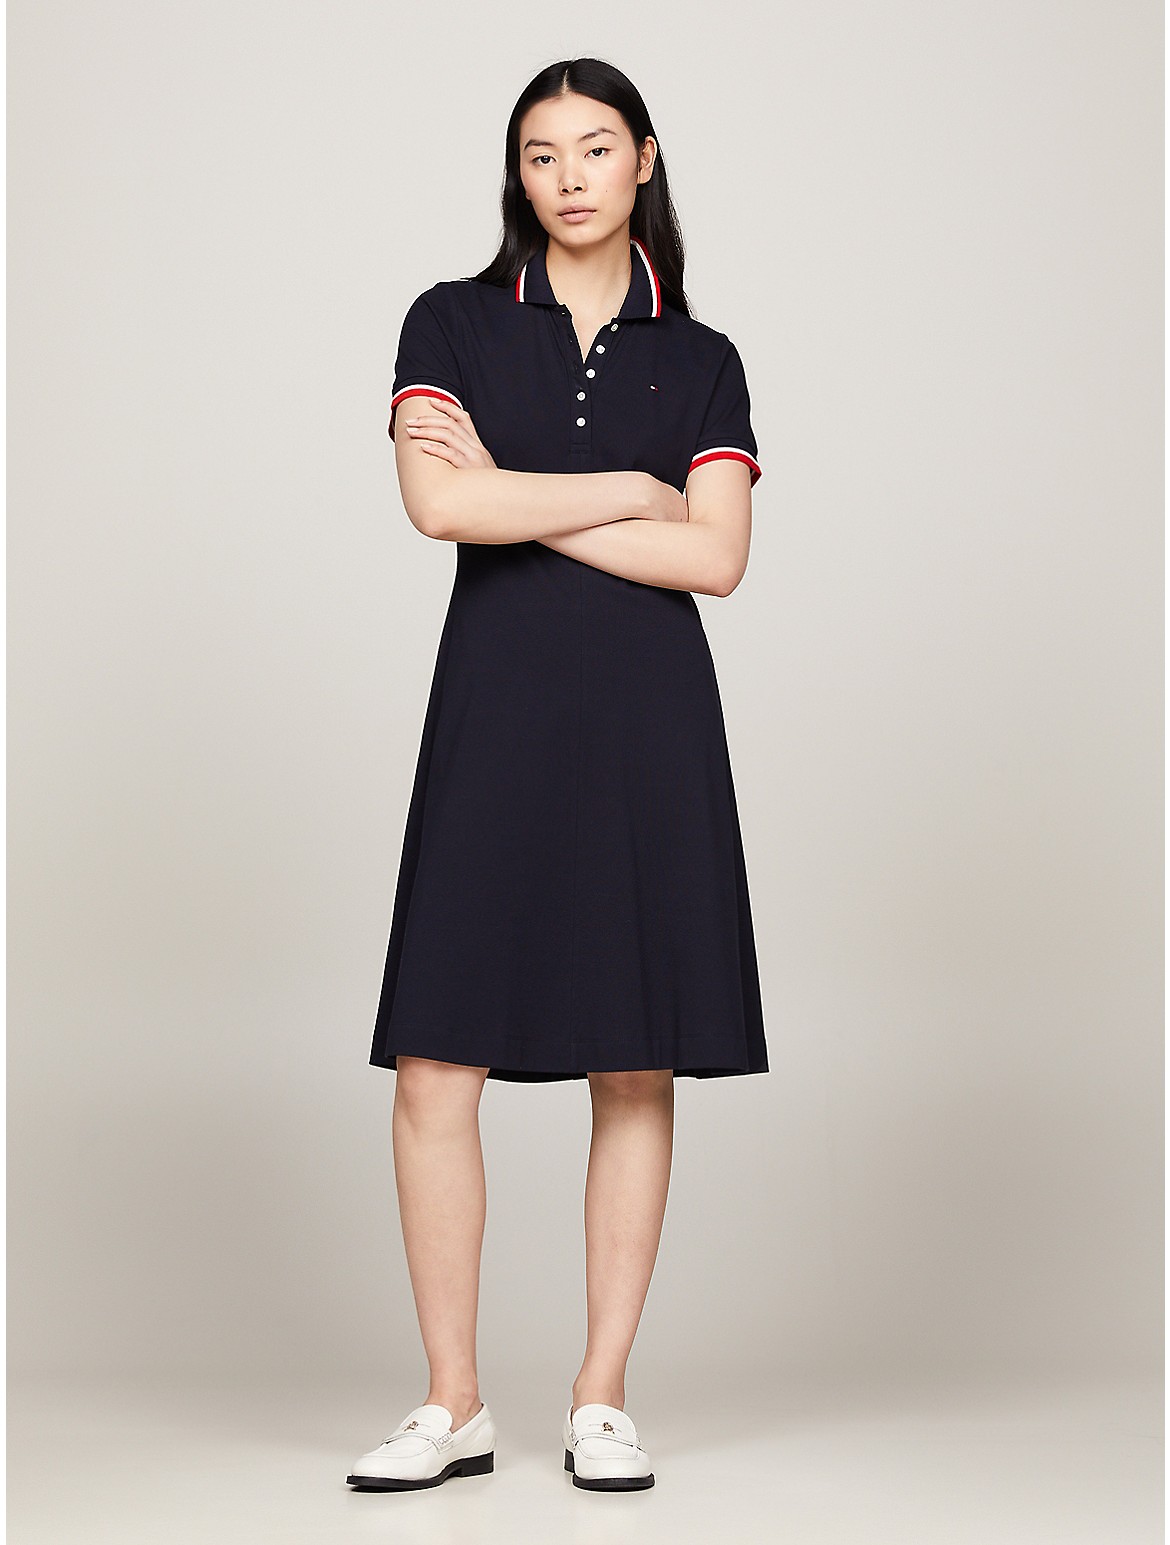 Tommy Hilfiger Women's Fit and Flare Polo Dress